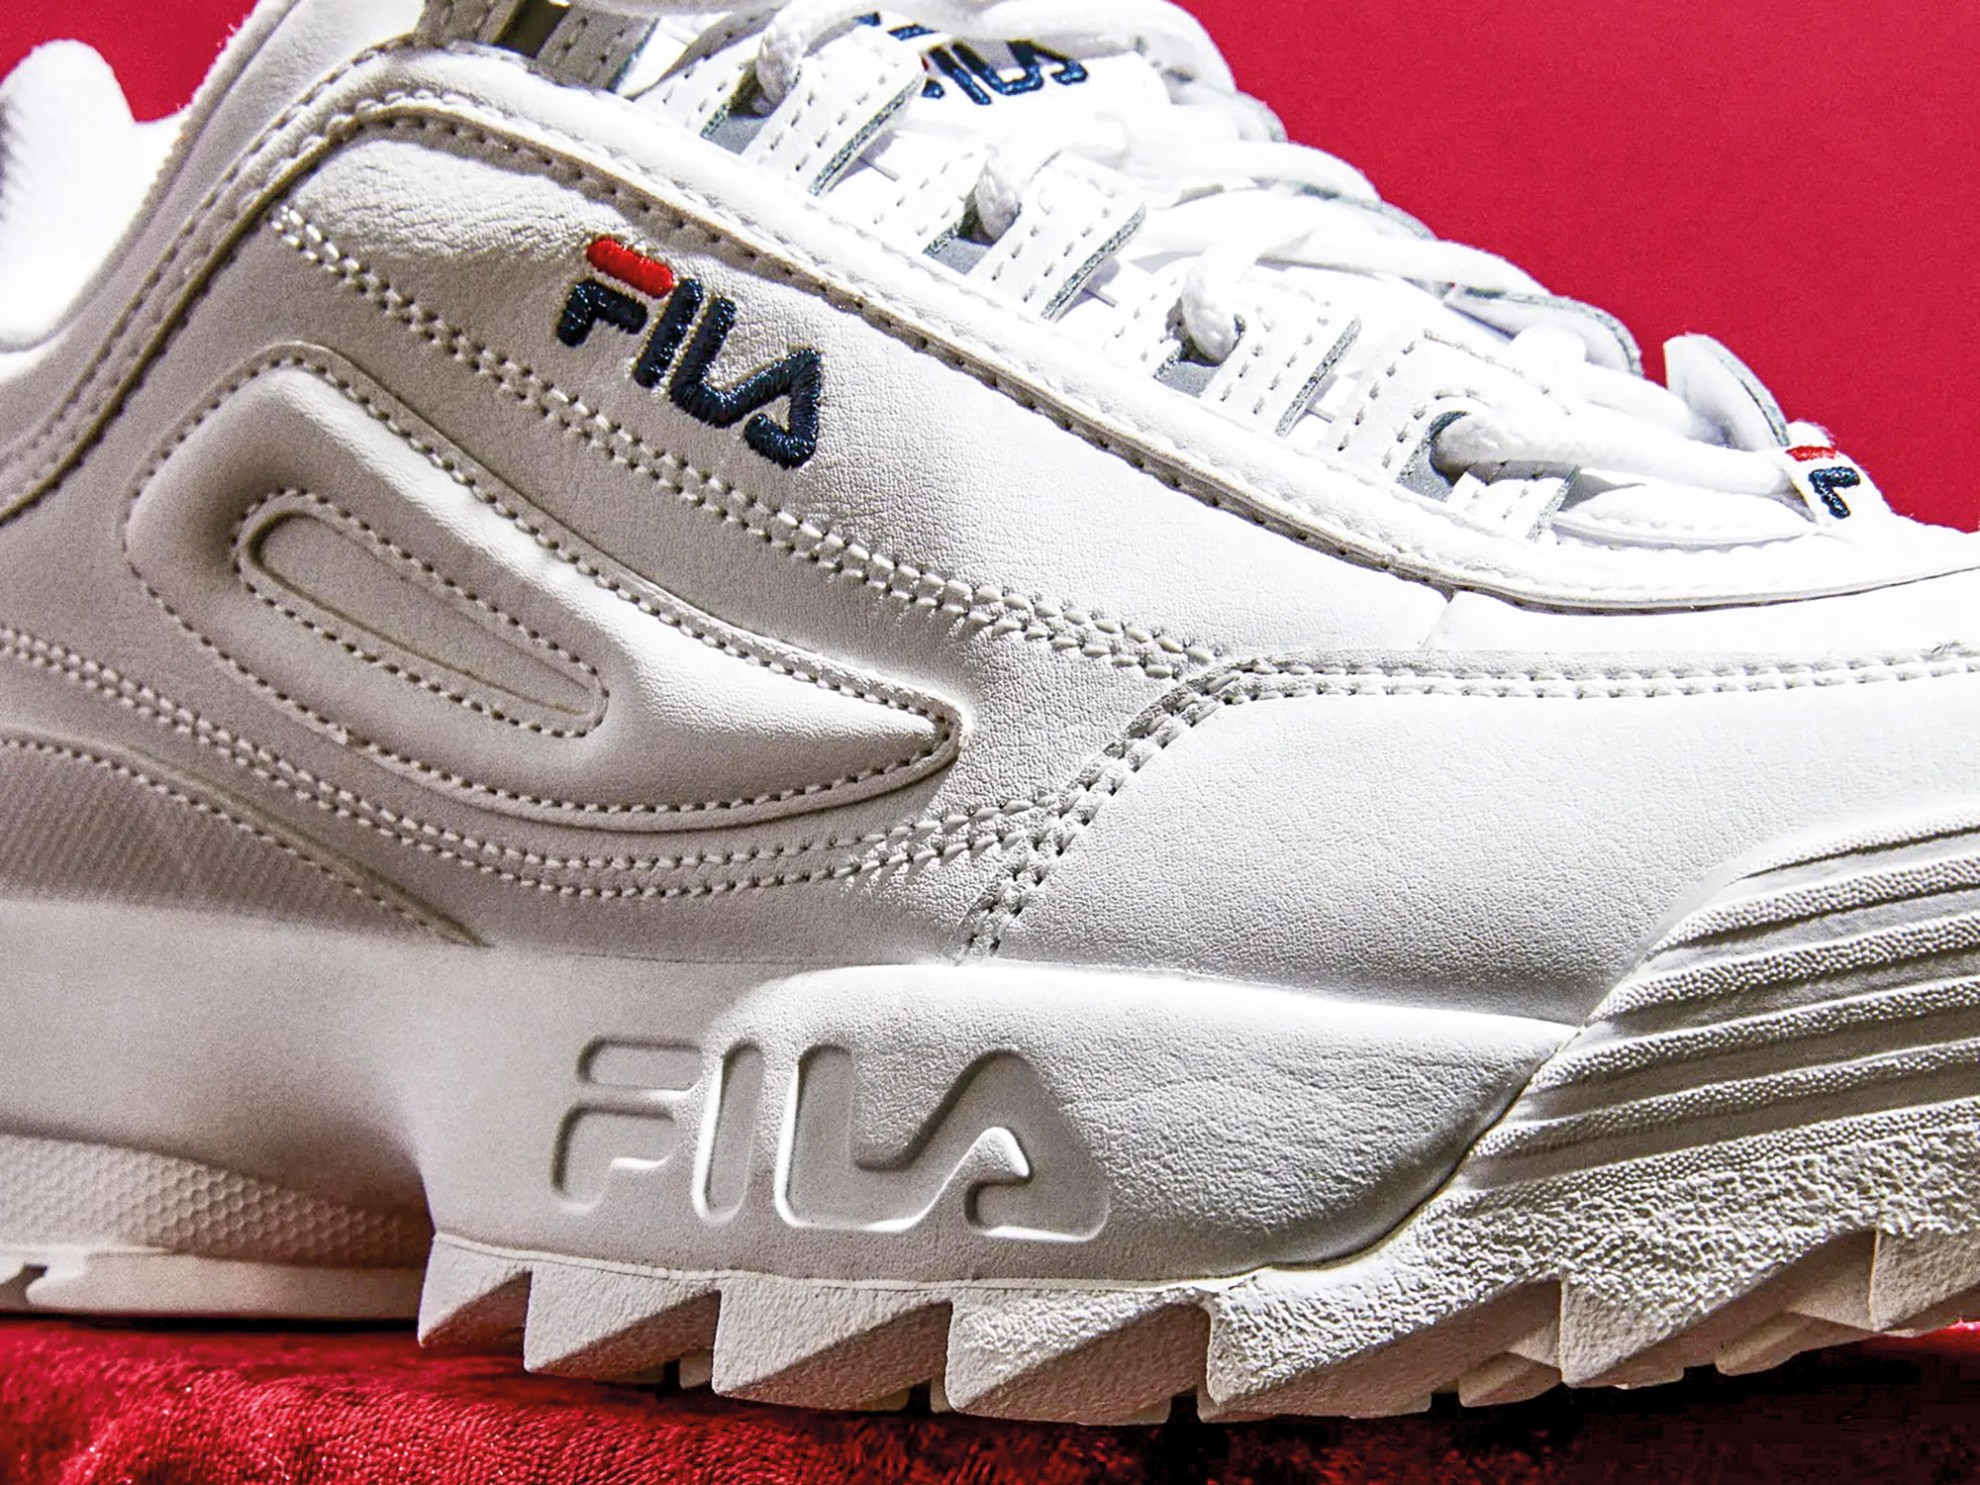 NEWS, COMPANIES, DASS-ADDED-FILA-BRAND-TO-ITS-PRODUCTION 